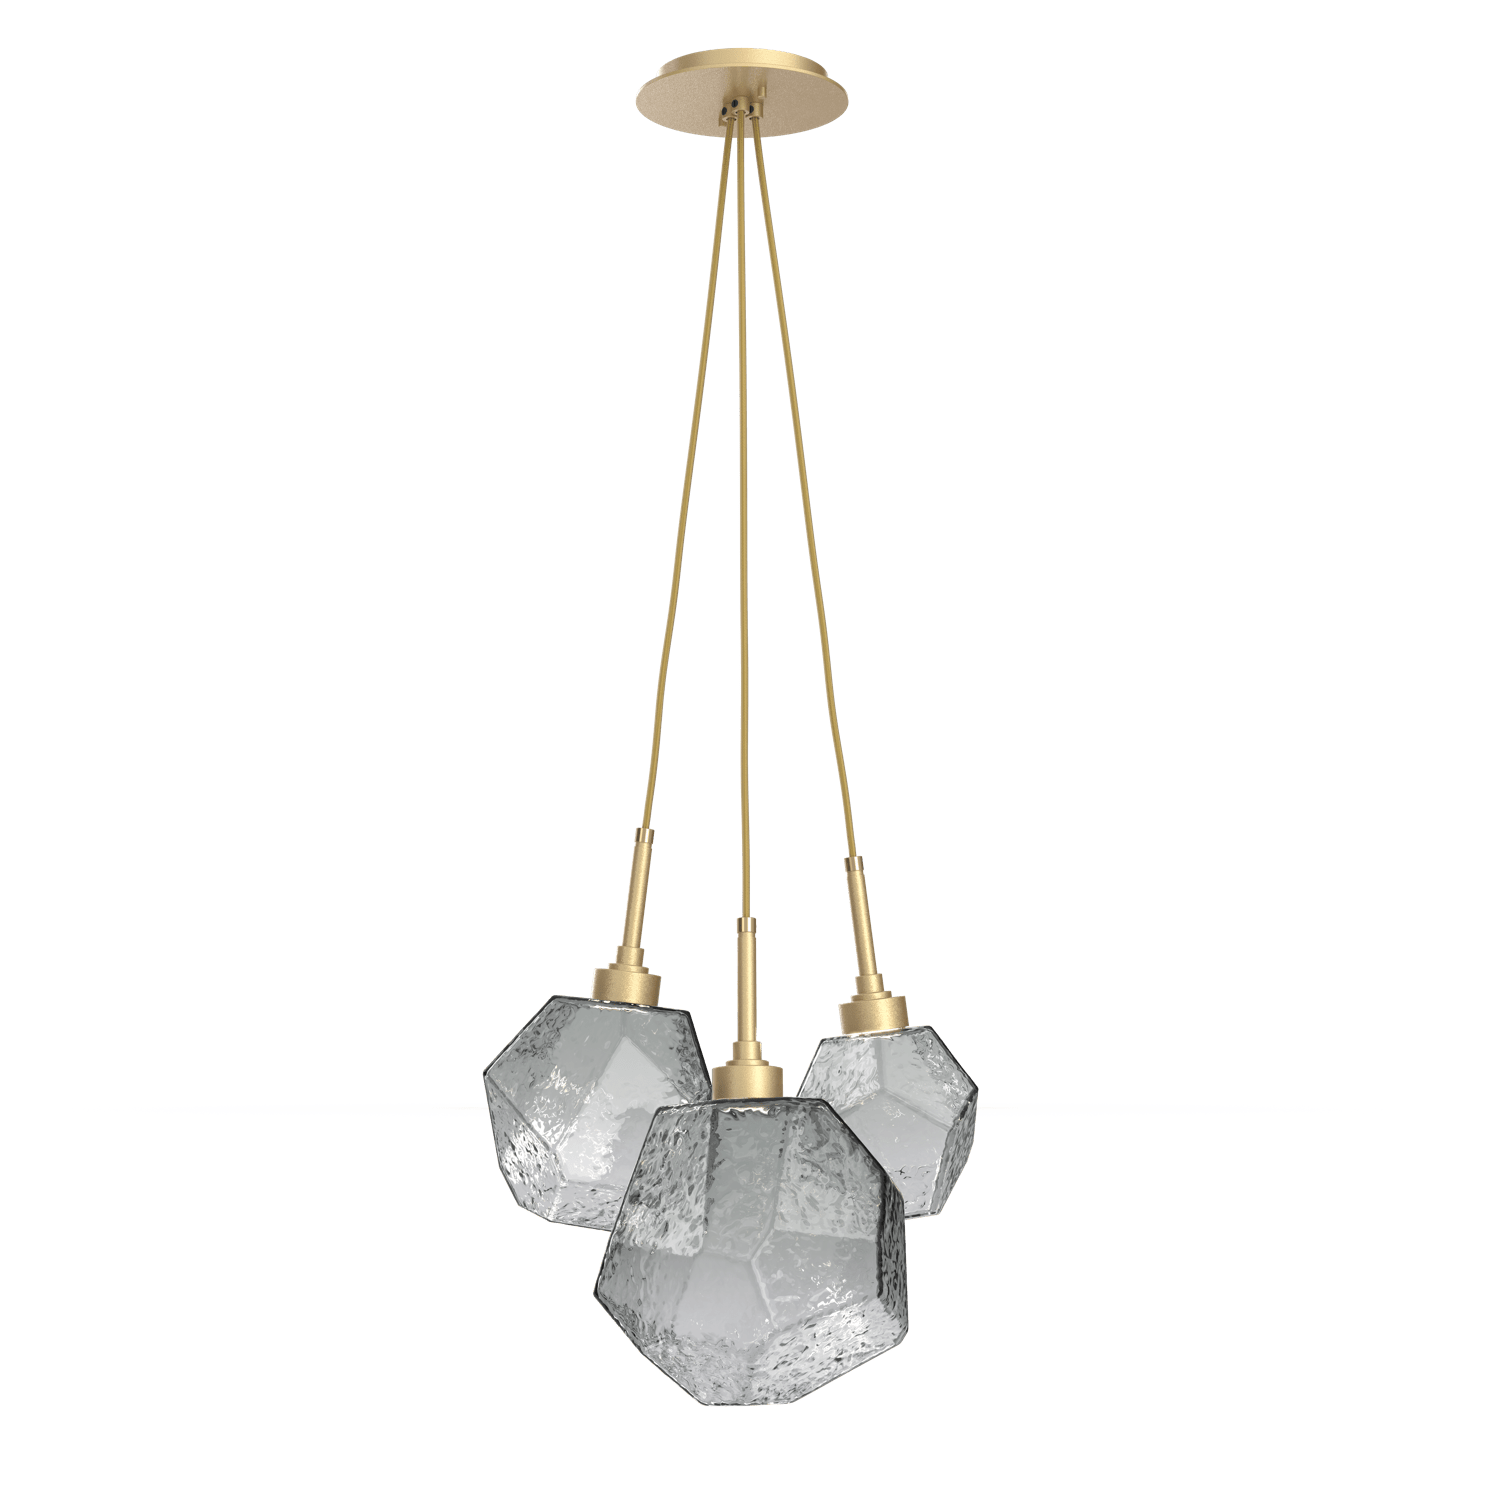 CHB0039-0E-GB-S-Hammerton-Studio-Gem-3-light-cluster-pendant-light-with-gilded-brass-finish-and-smoke-blown-glass-shades-and-LED-lamping